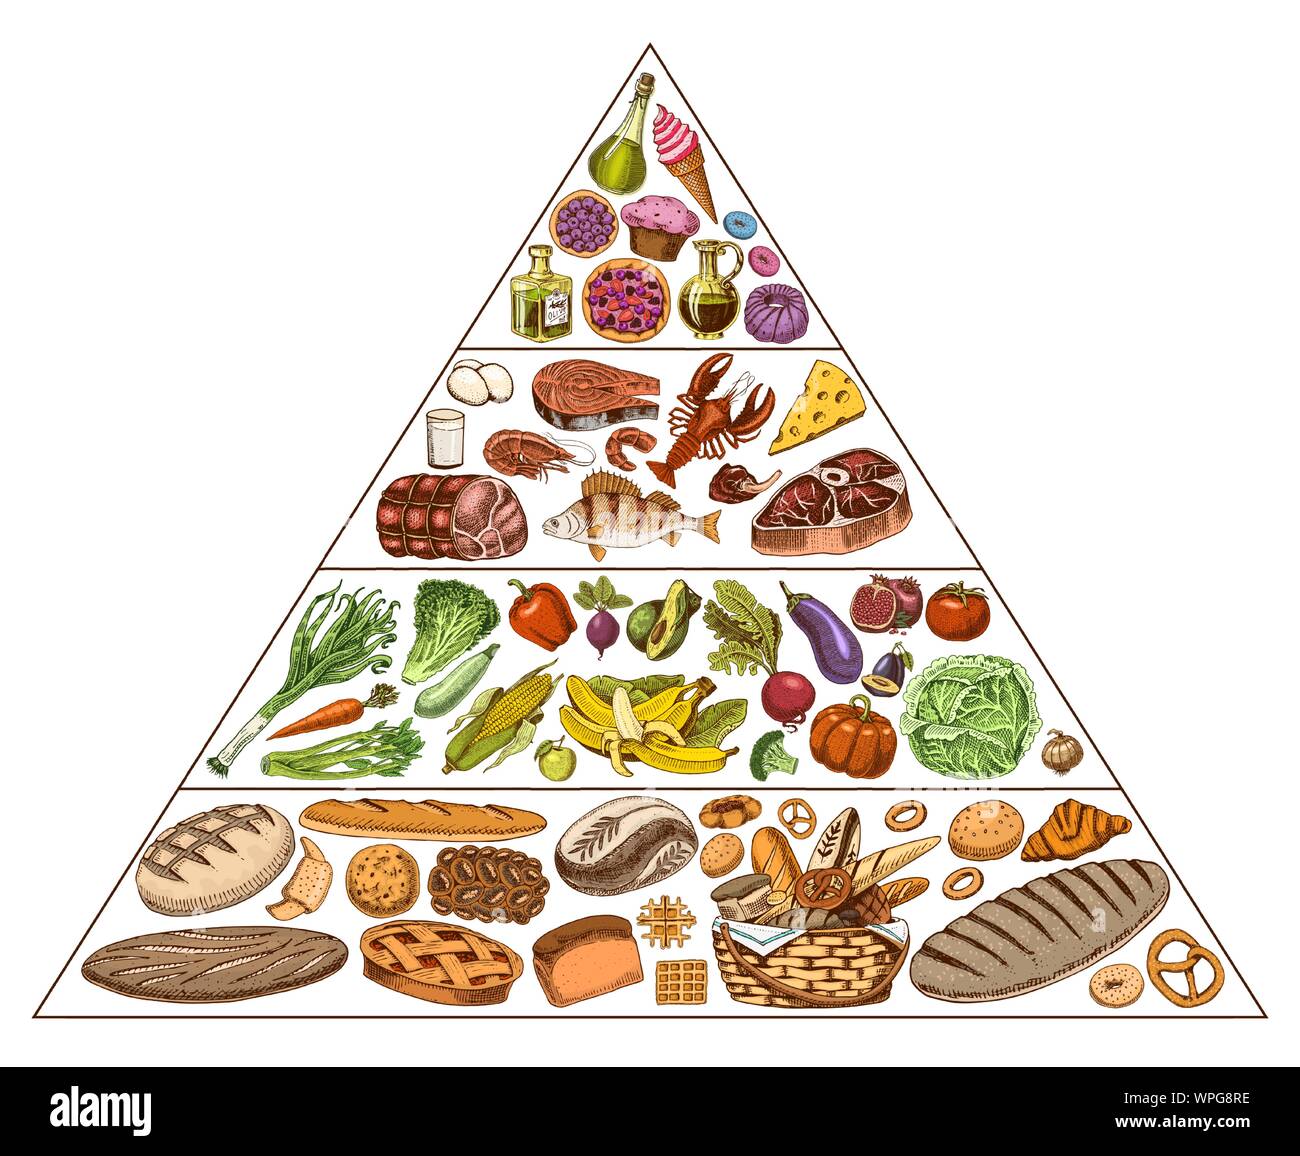 Healthy Eating Percentages Pie Chart